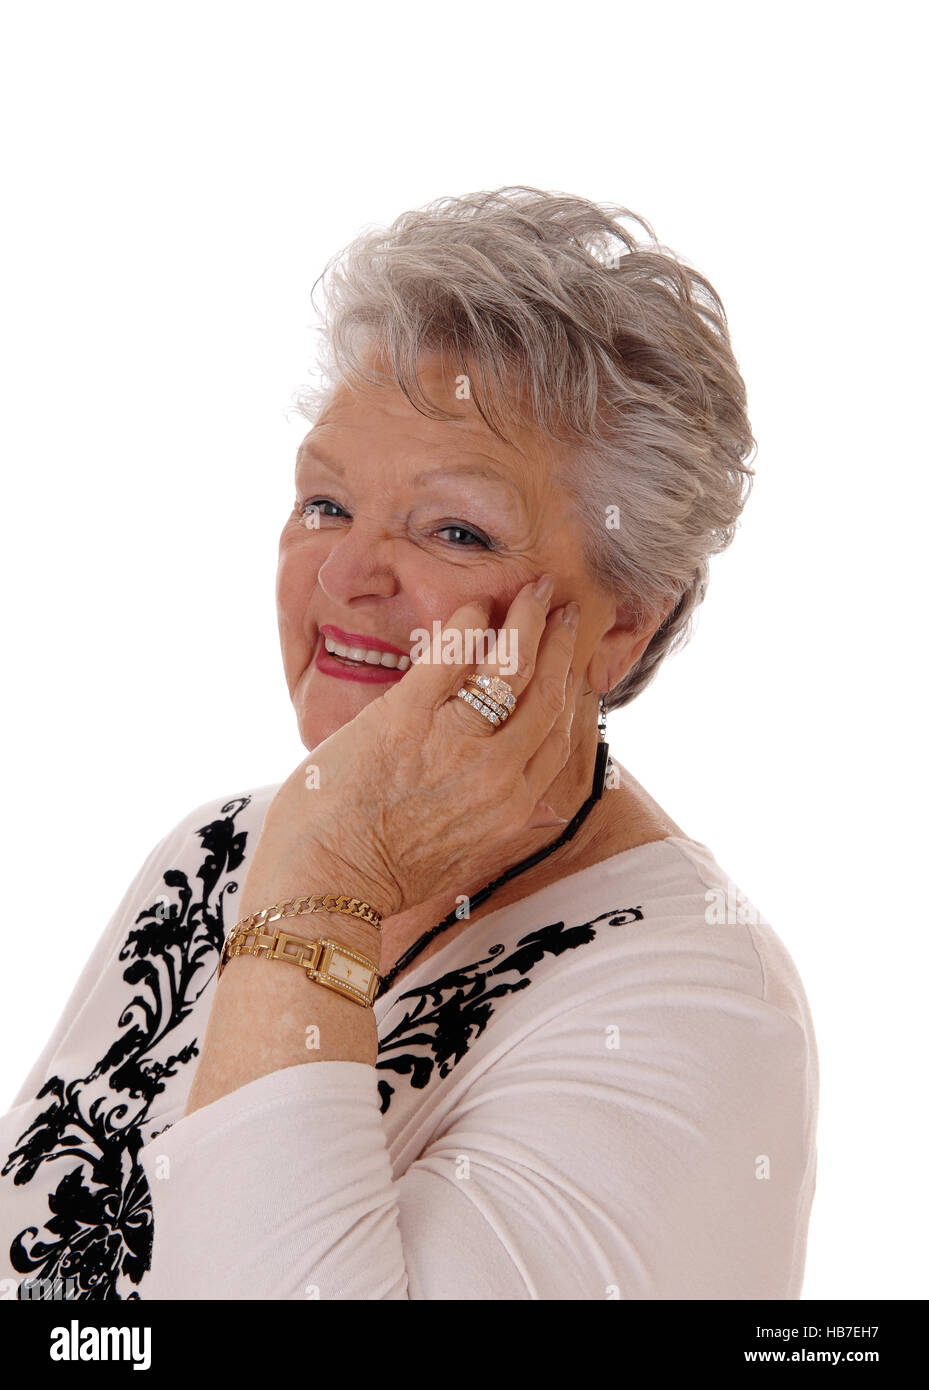 Smiling senior woman holding hand on face. Stock Photo